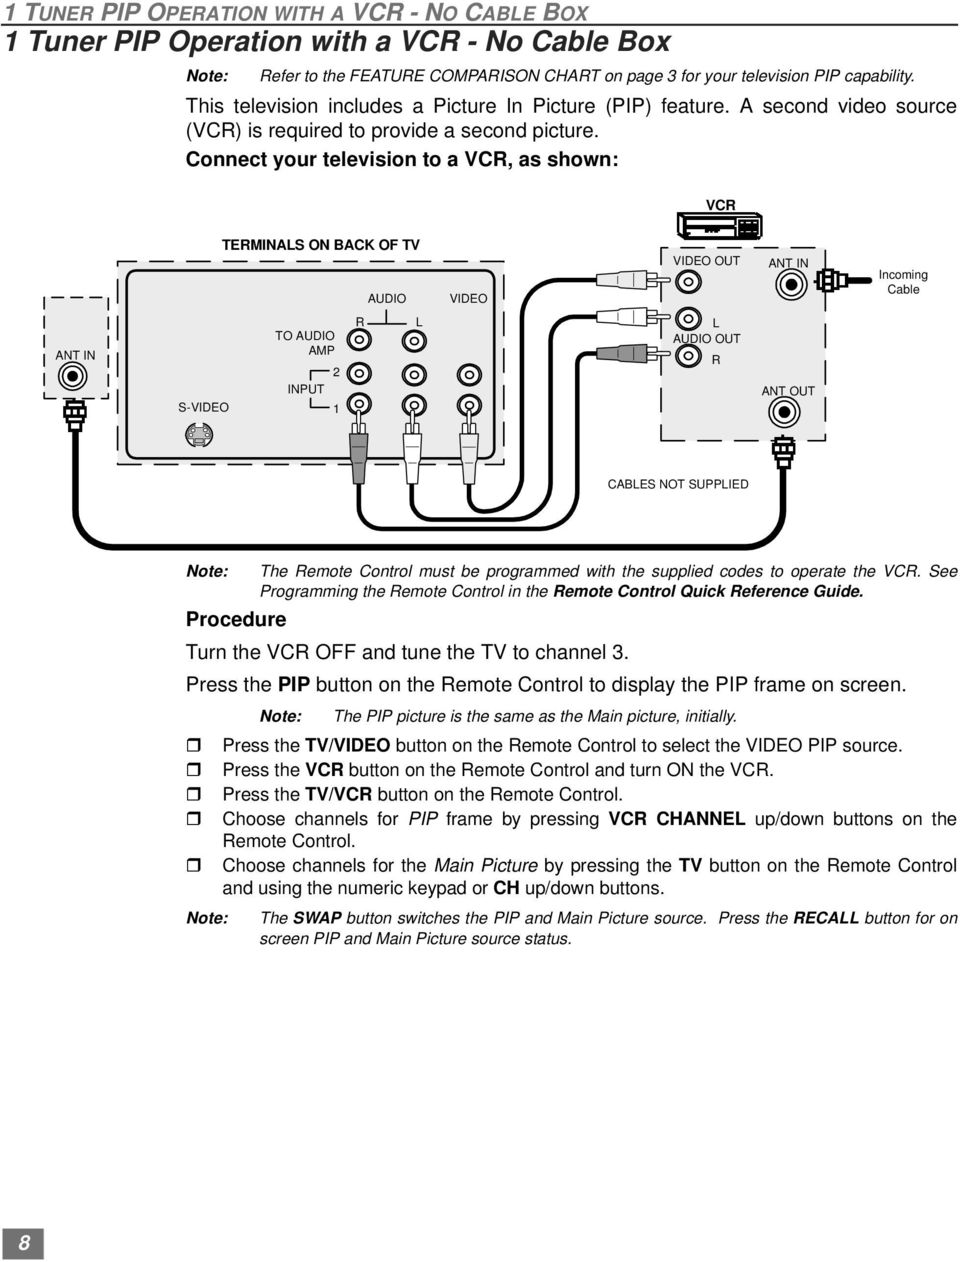 Connect your television to a VC, as shown: VC TEMINAS ON BACK OF TV AUDIO VIDEO VIDEO OUT ANT IN Incoming Cable ANT IN S-VIDEO TO AUDIO AMP INPUT 1 AUDIO OUT ANT OUT CABES NOT SUPPIED Note: The emote